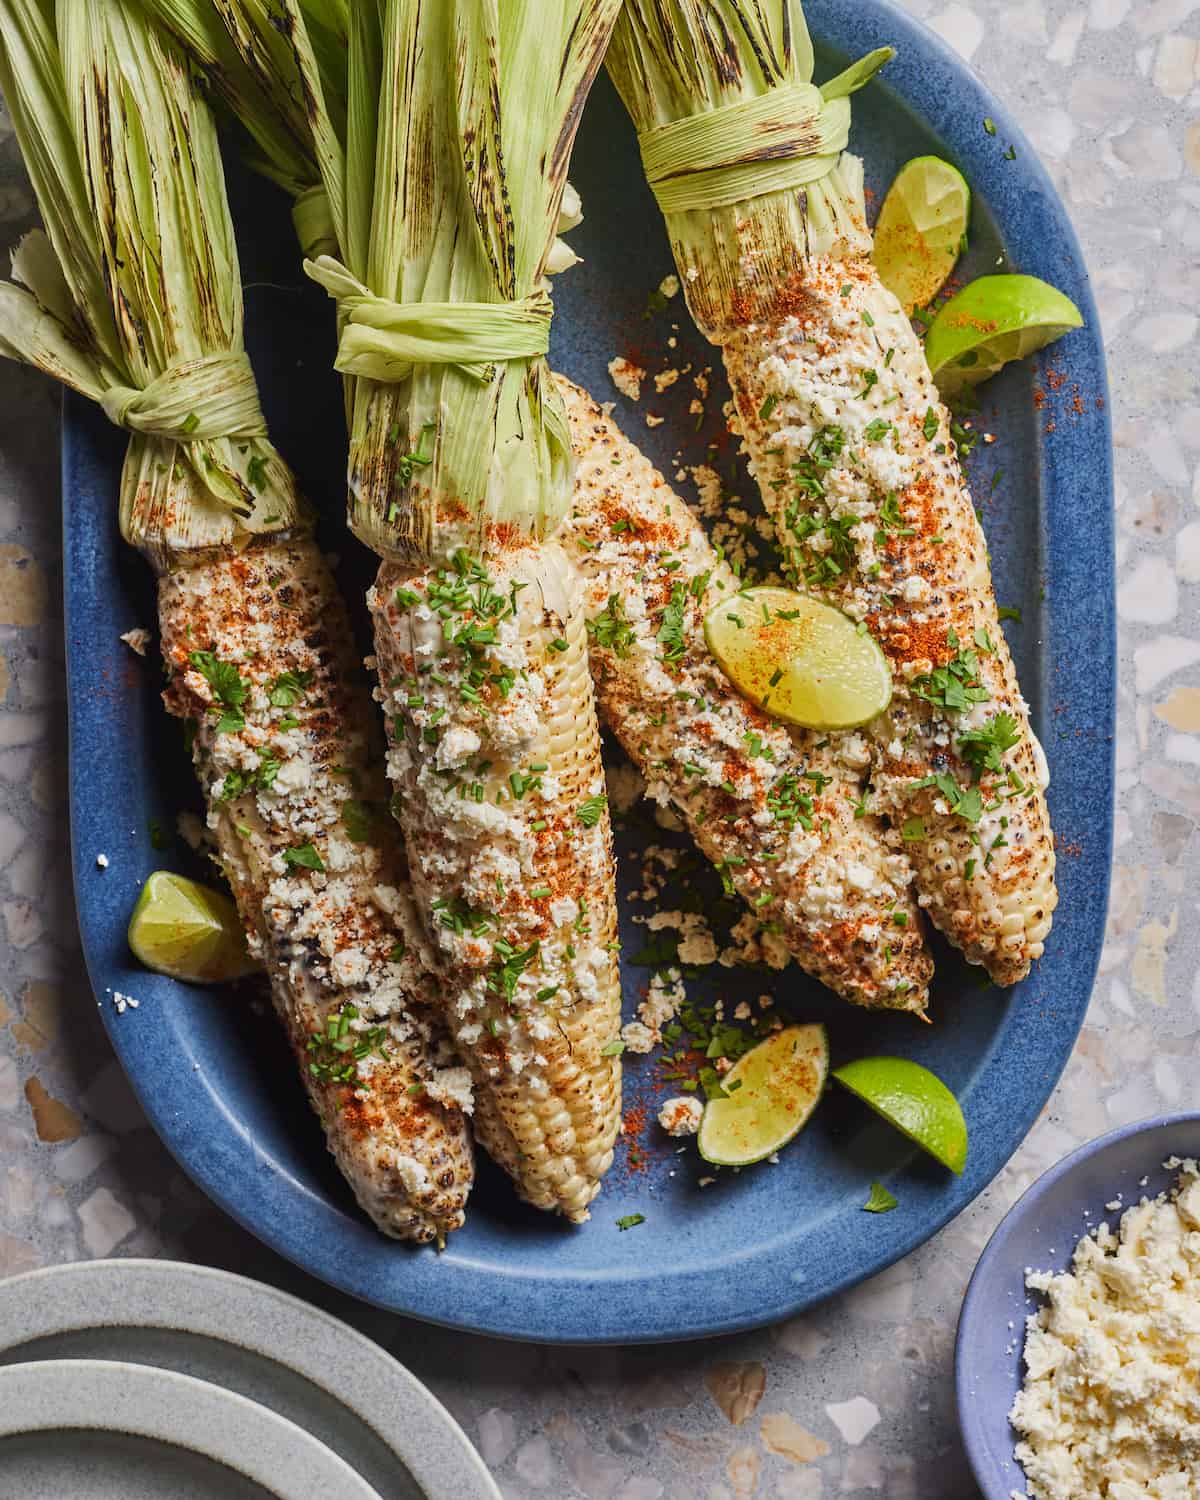 Four cobs of corn covered in feta, cilantro, butter, and lime wedges.  